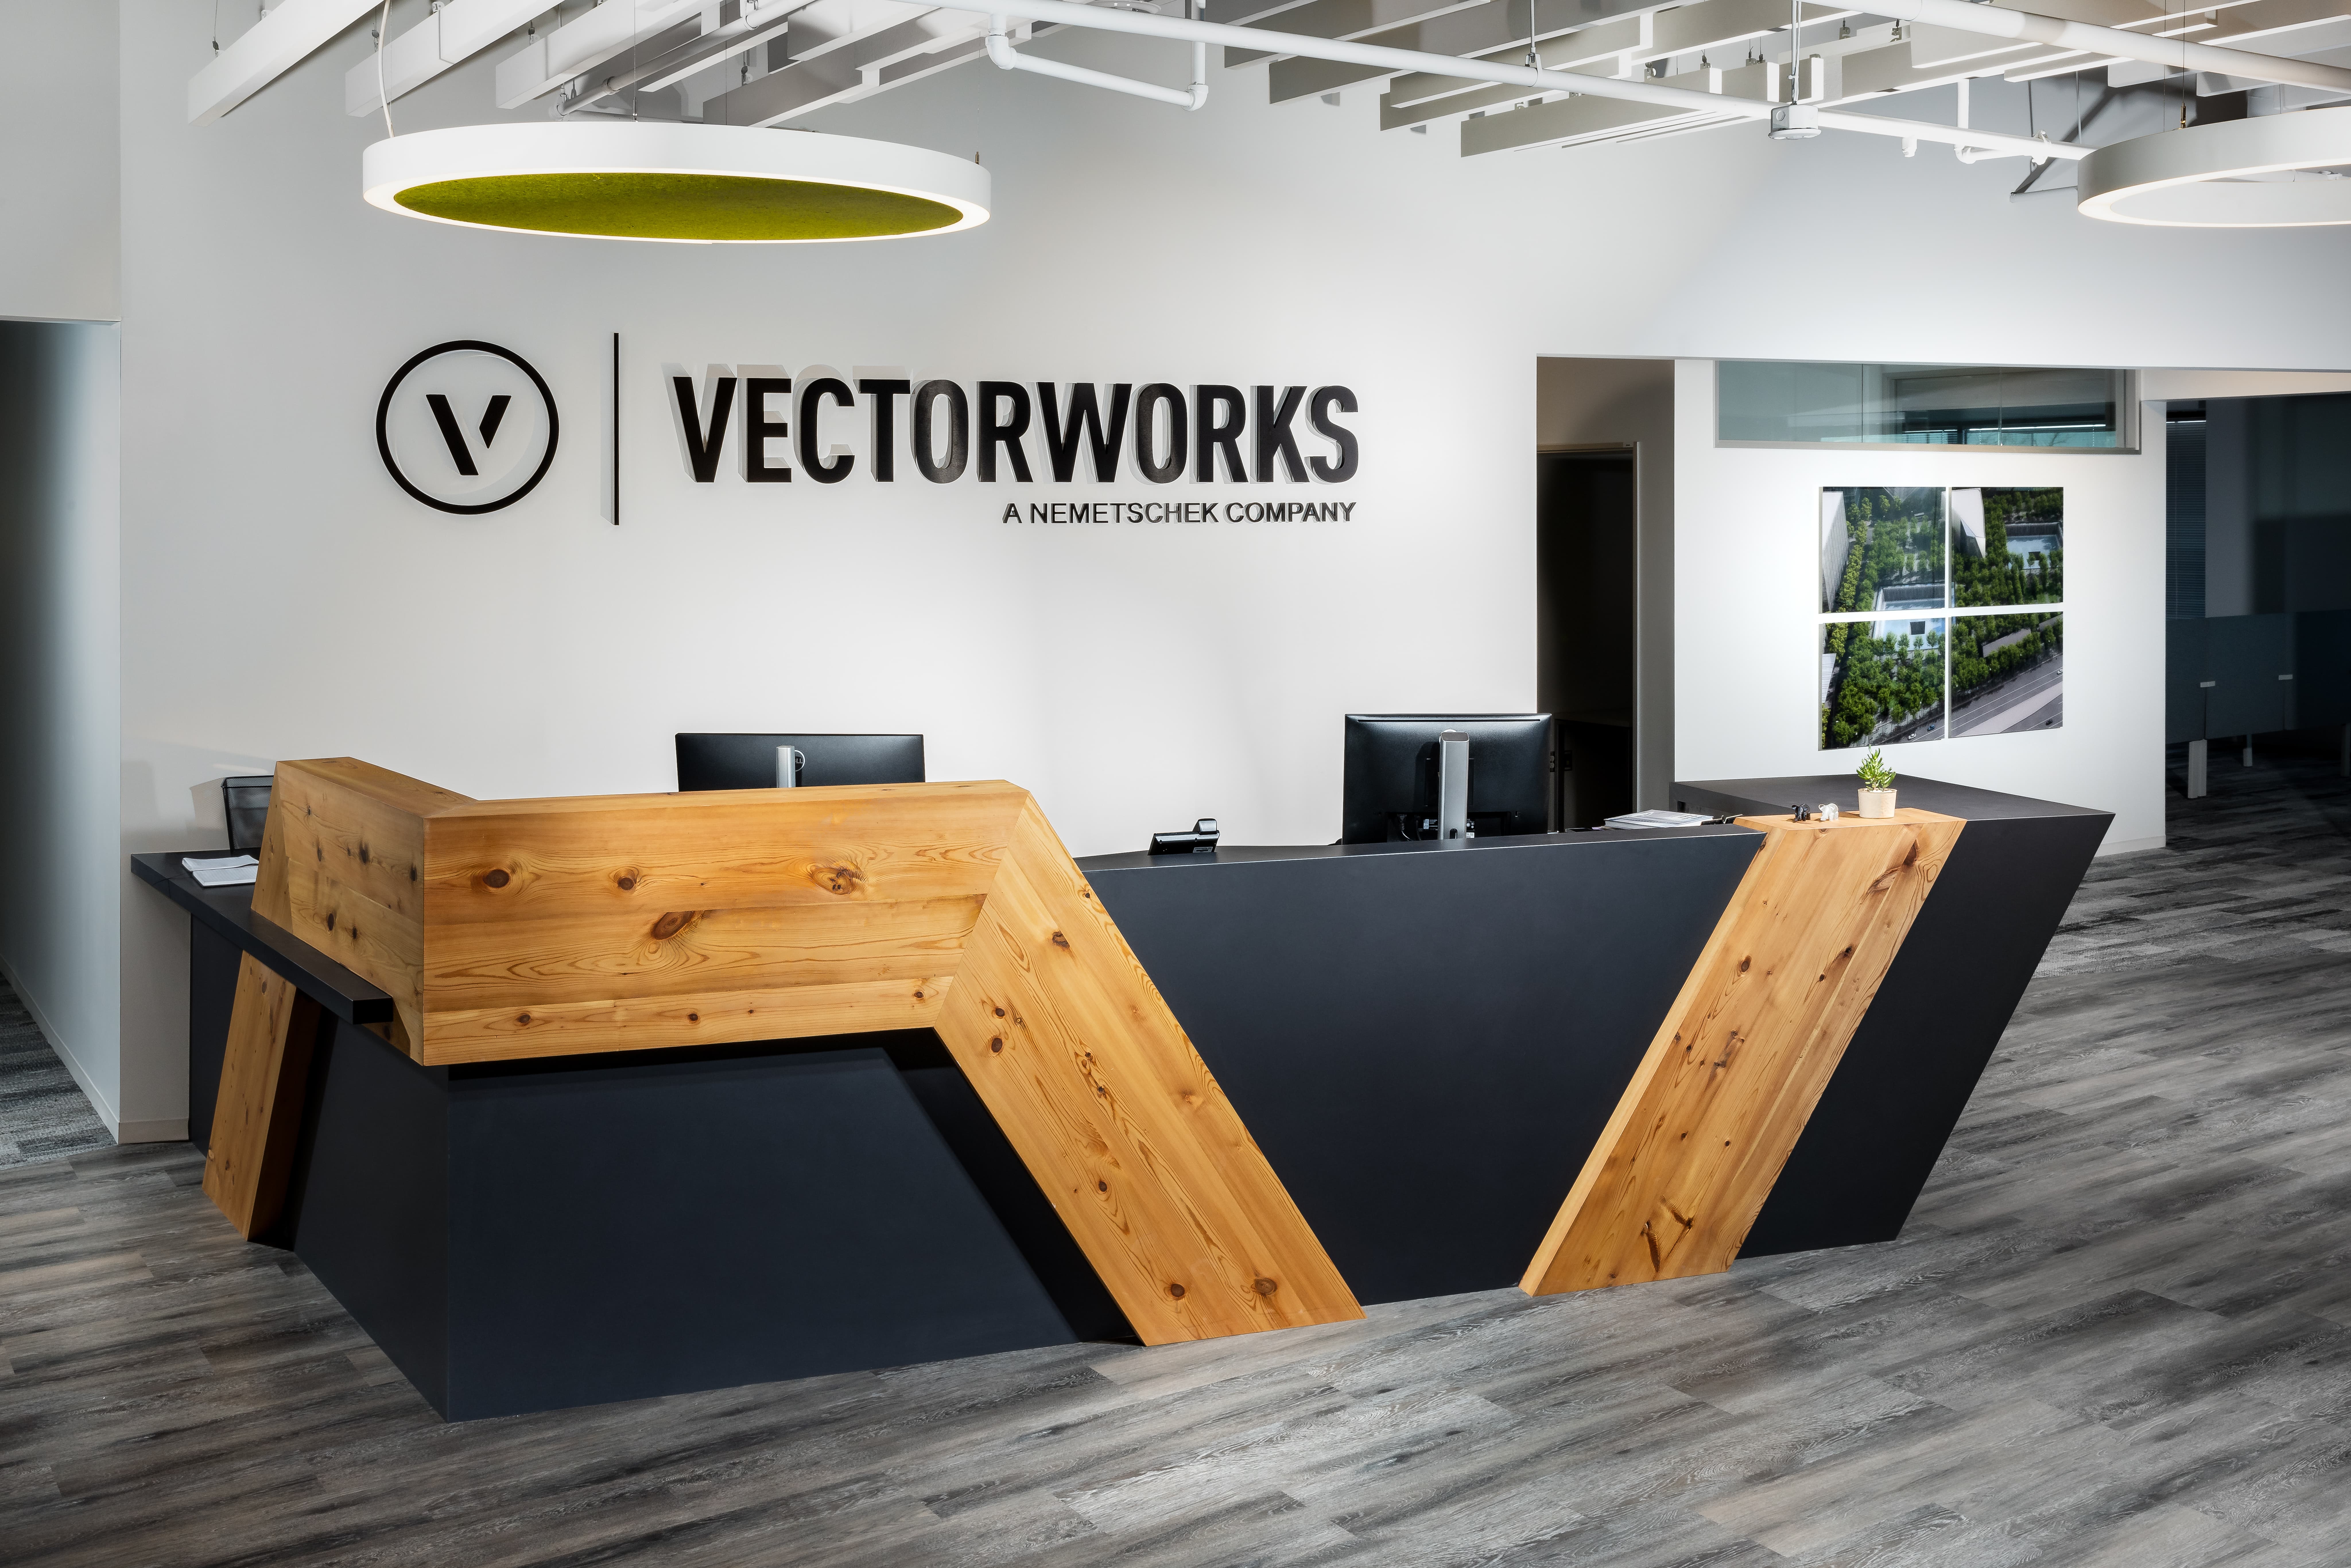 Vectorworks’ Core Values Shine at New Corporate Headquarters